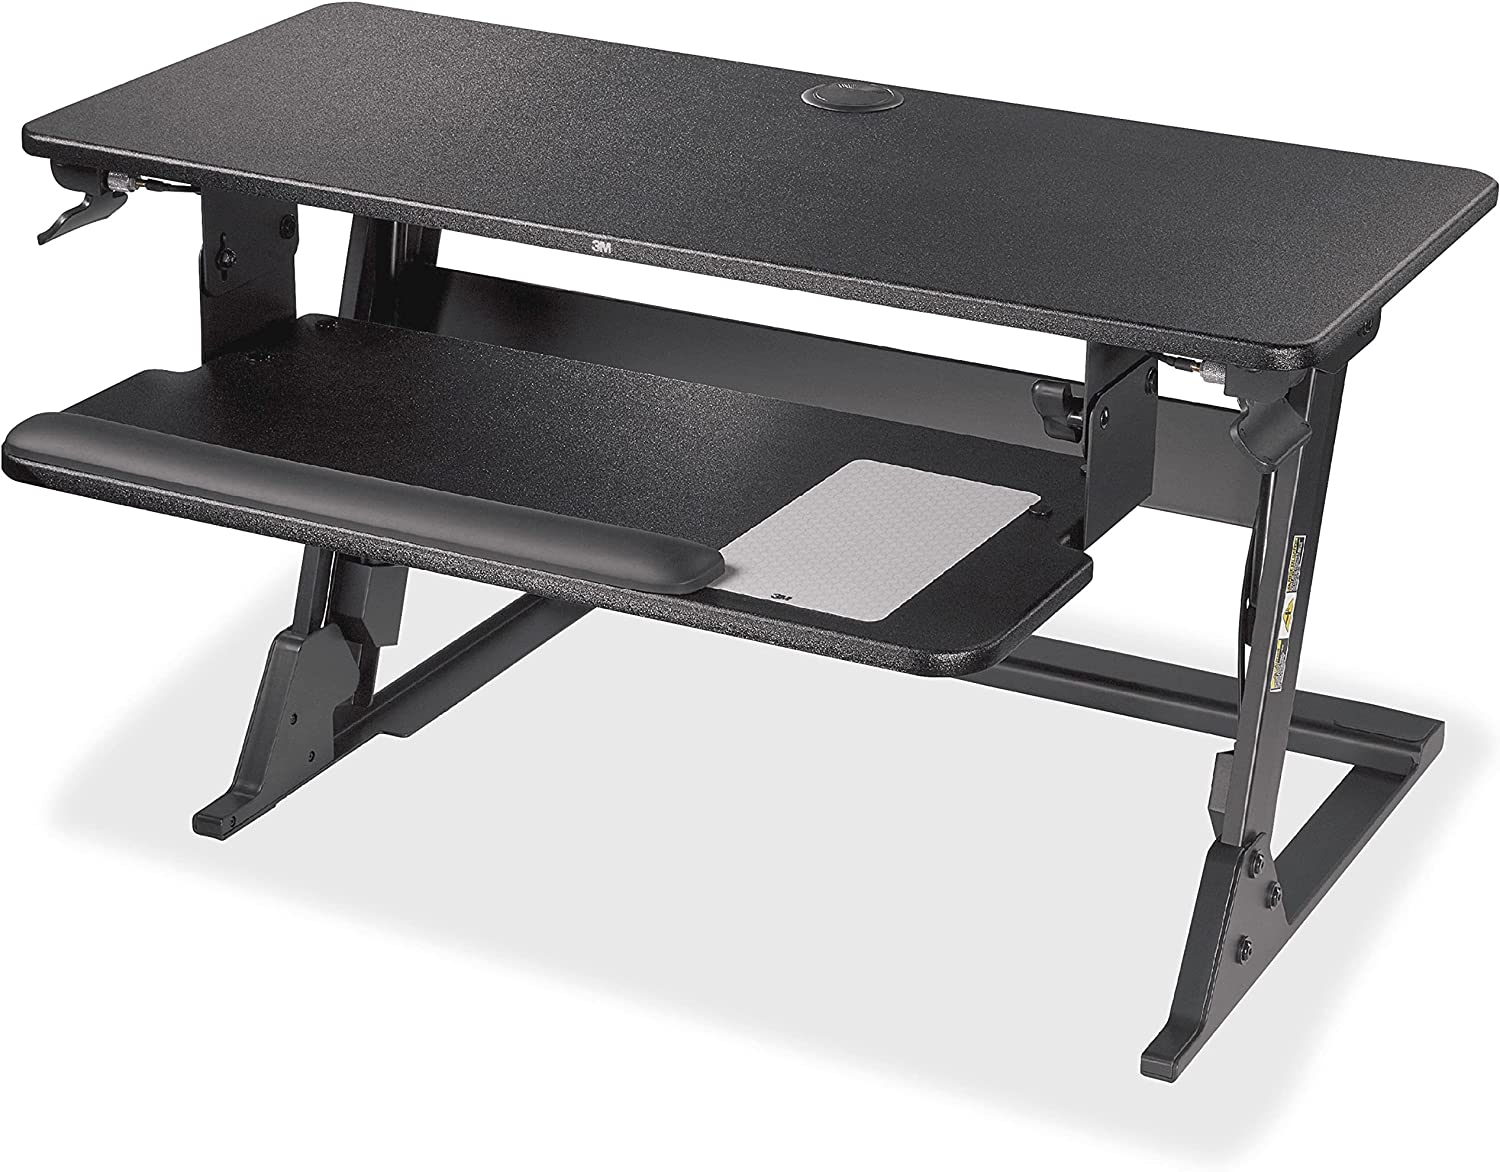 '''3M Precision Standing Desk Up to 24'''' Screen Support 35lb Load Capacity - Black'''